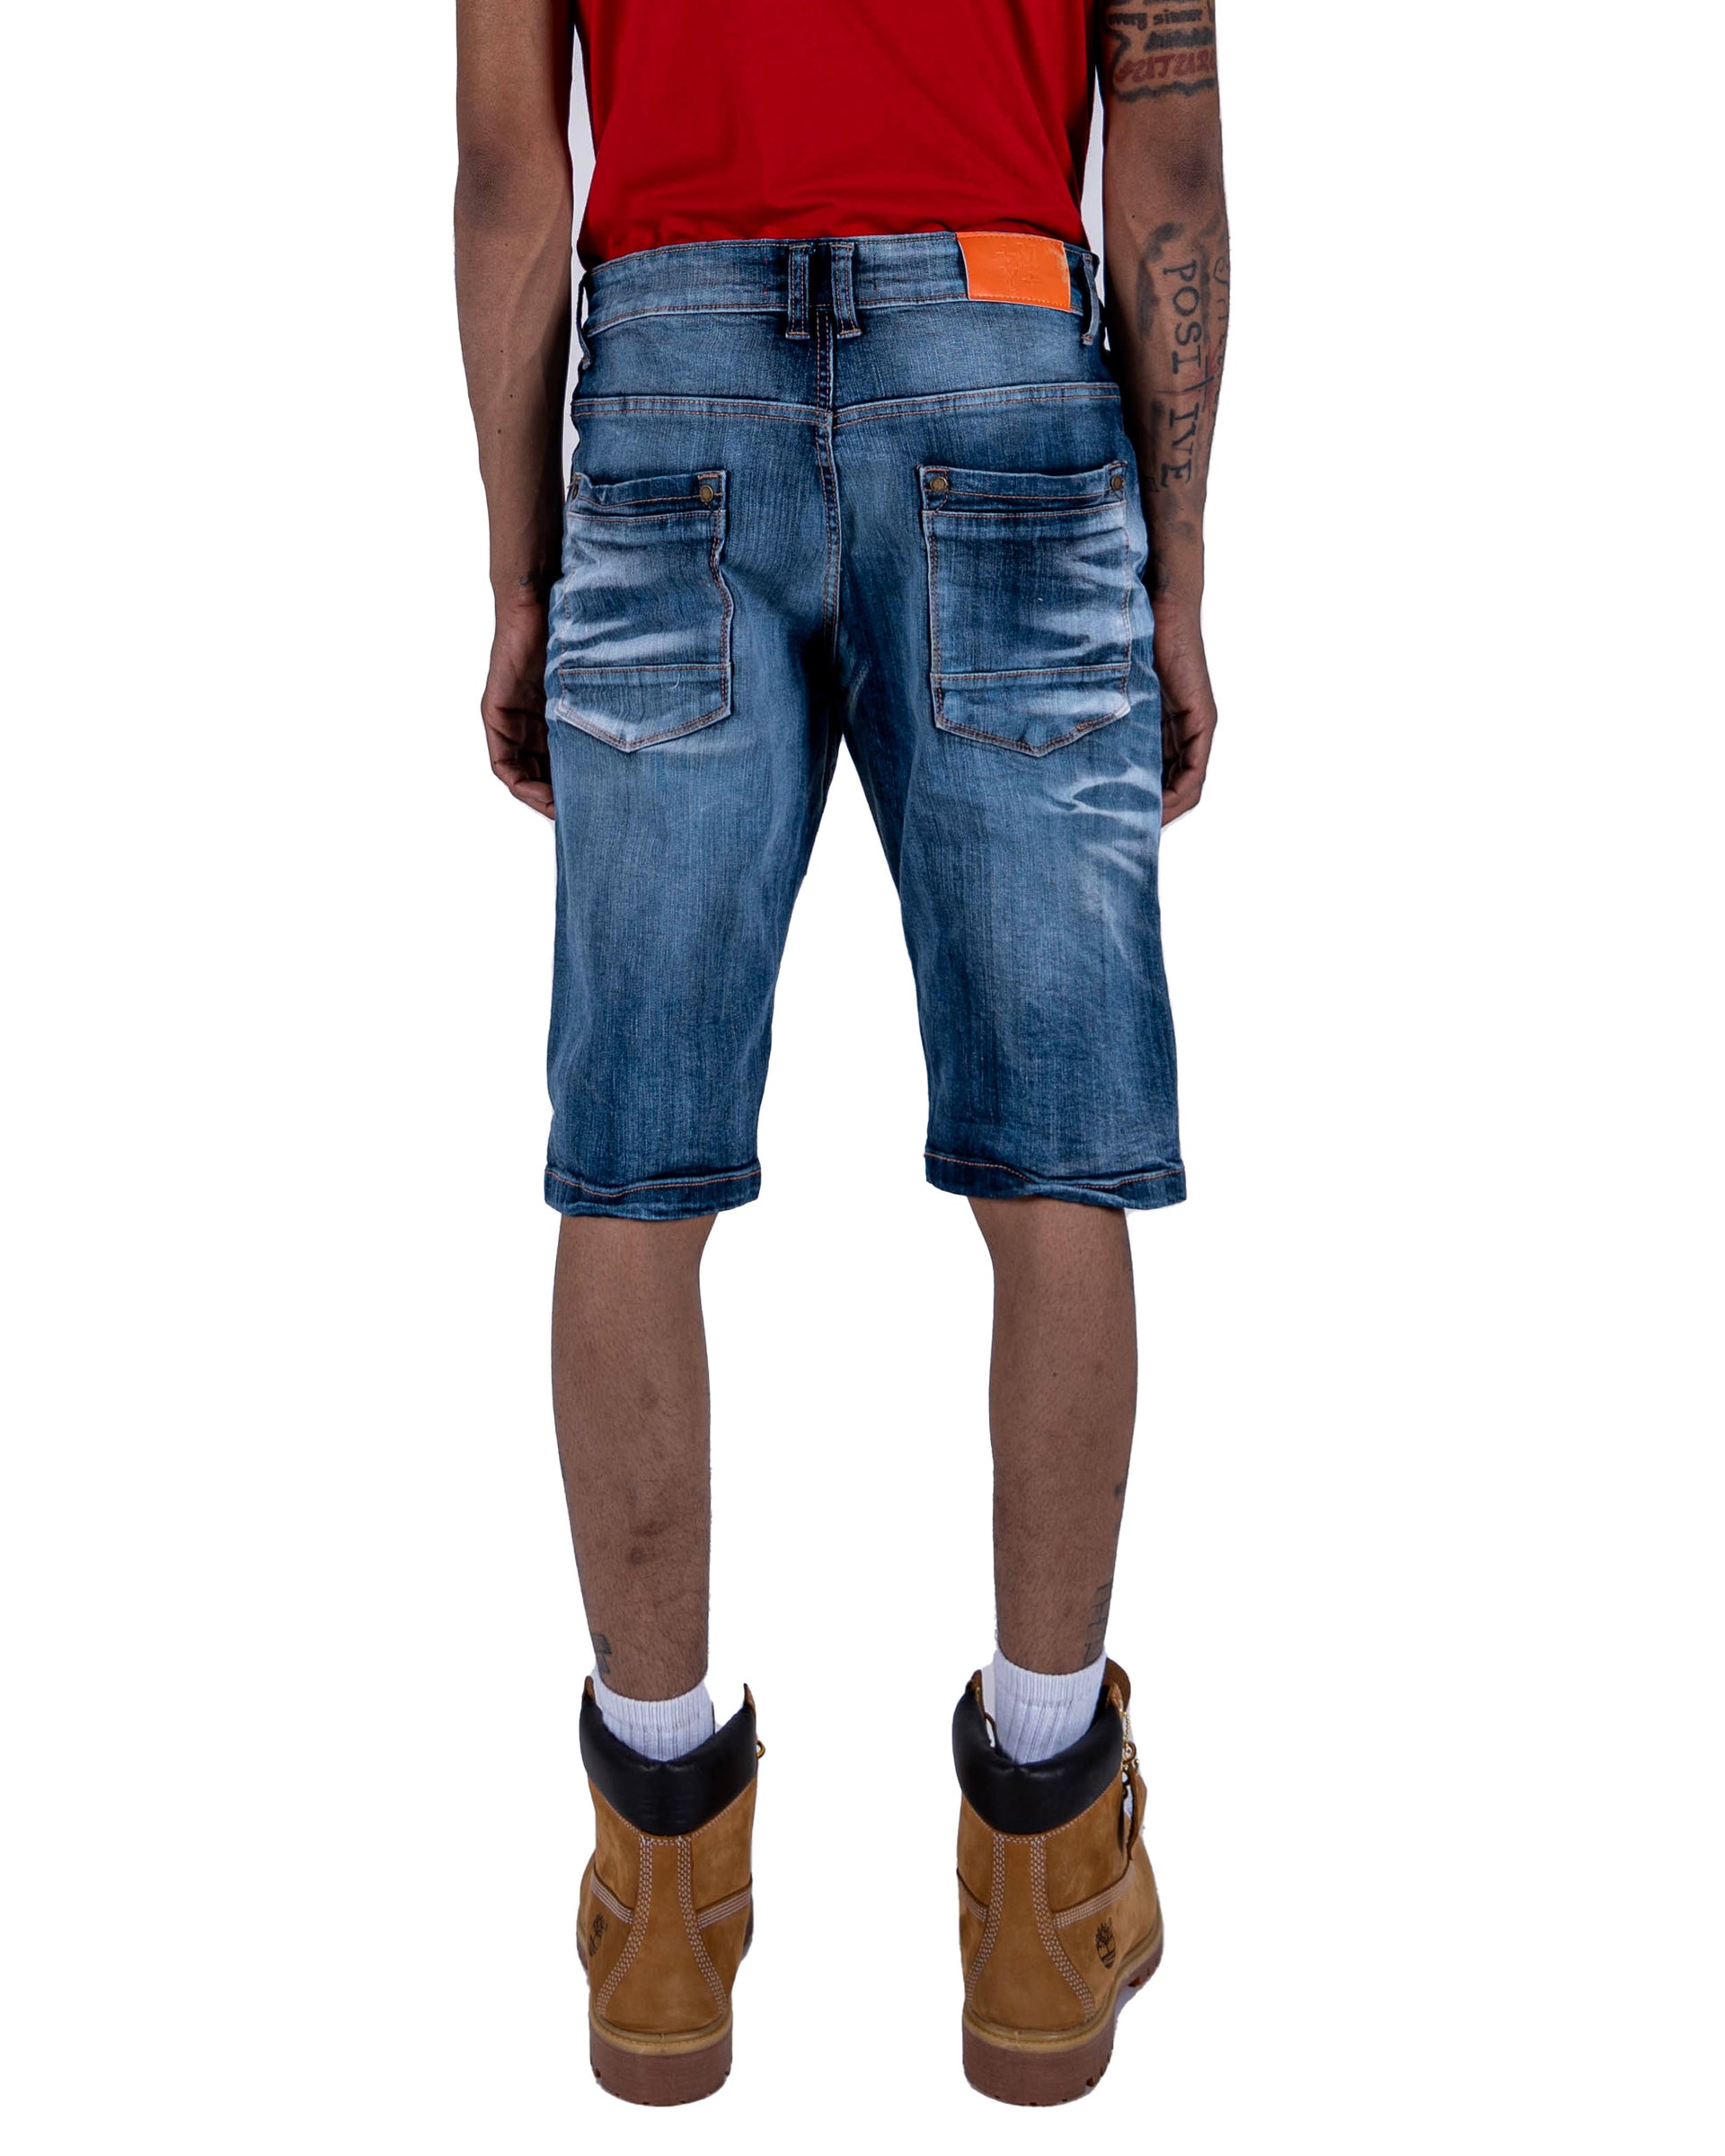 HARRISON | Men's Classic Fit Carpenter Style Distressed Denim Jean Shorts in Blue Ink Stain